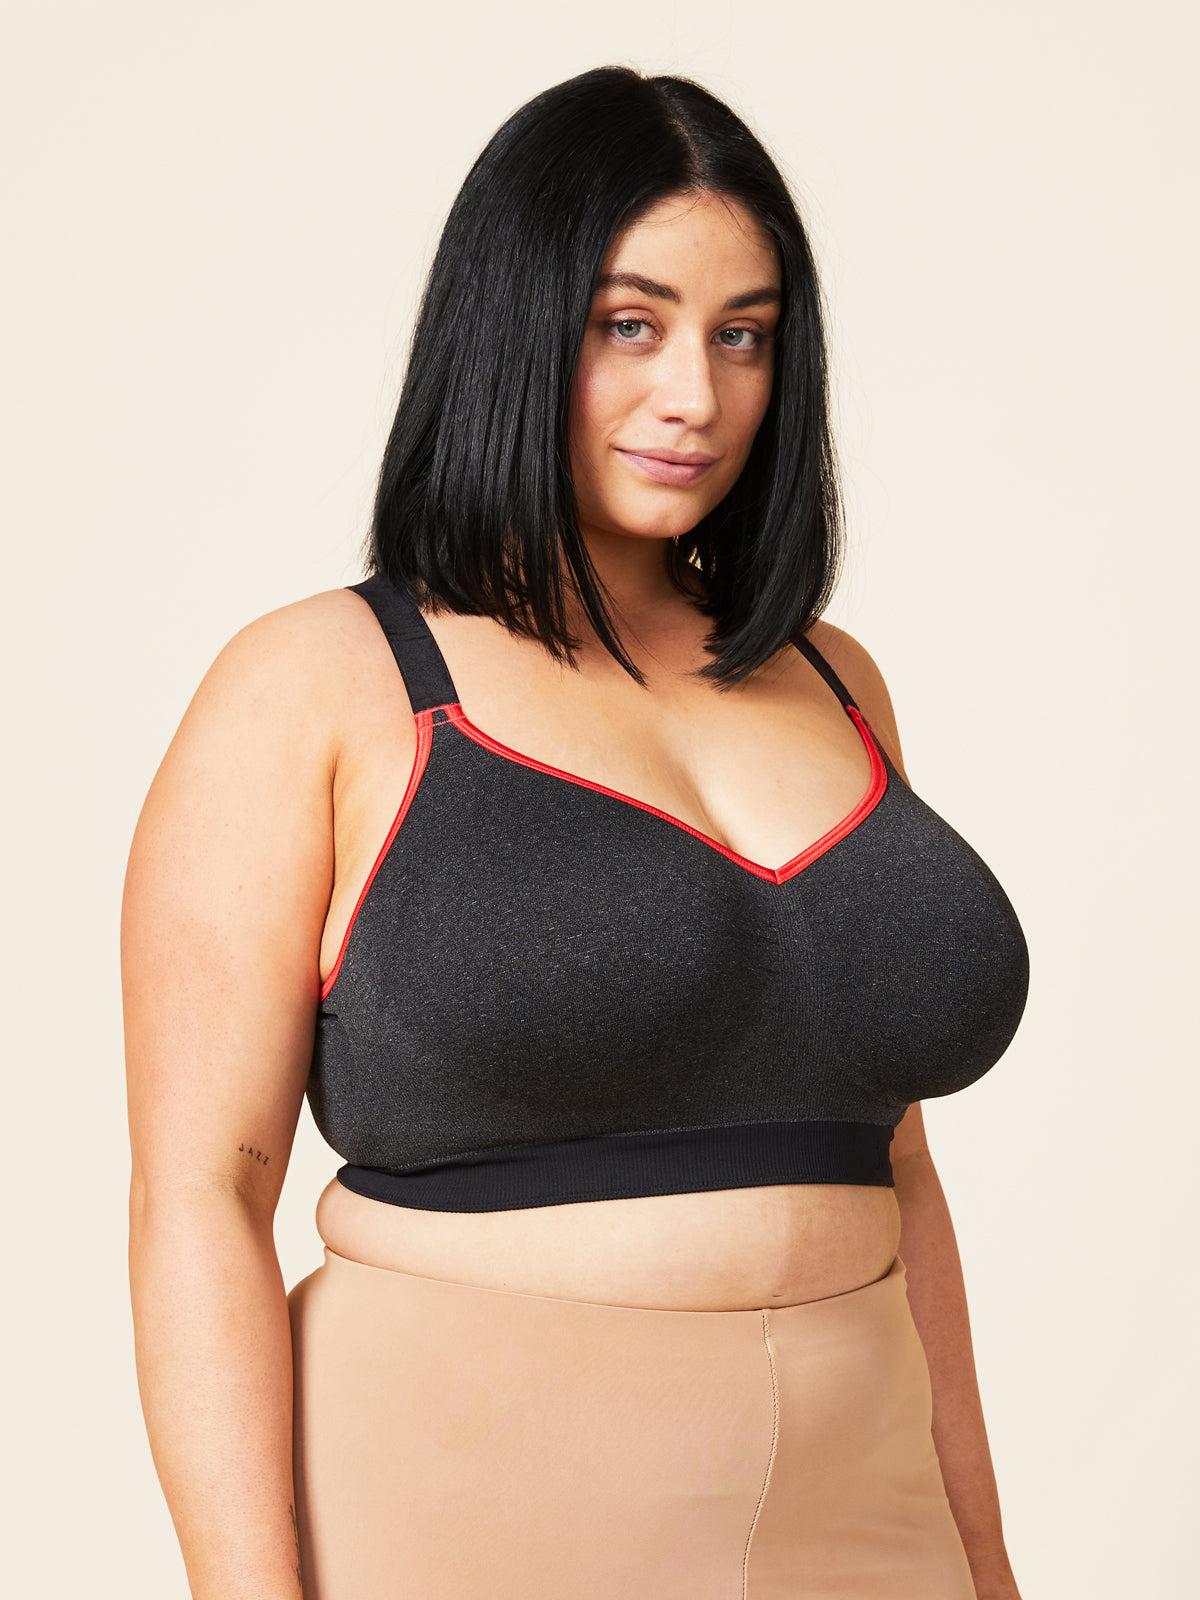 GATXVG Plus Size Bras for Big Busted Women No Underwire Front